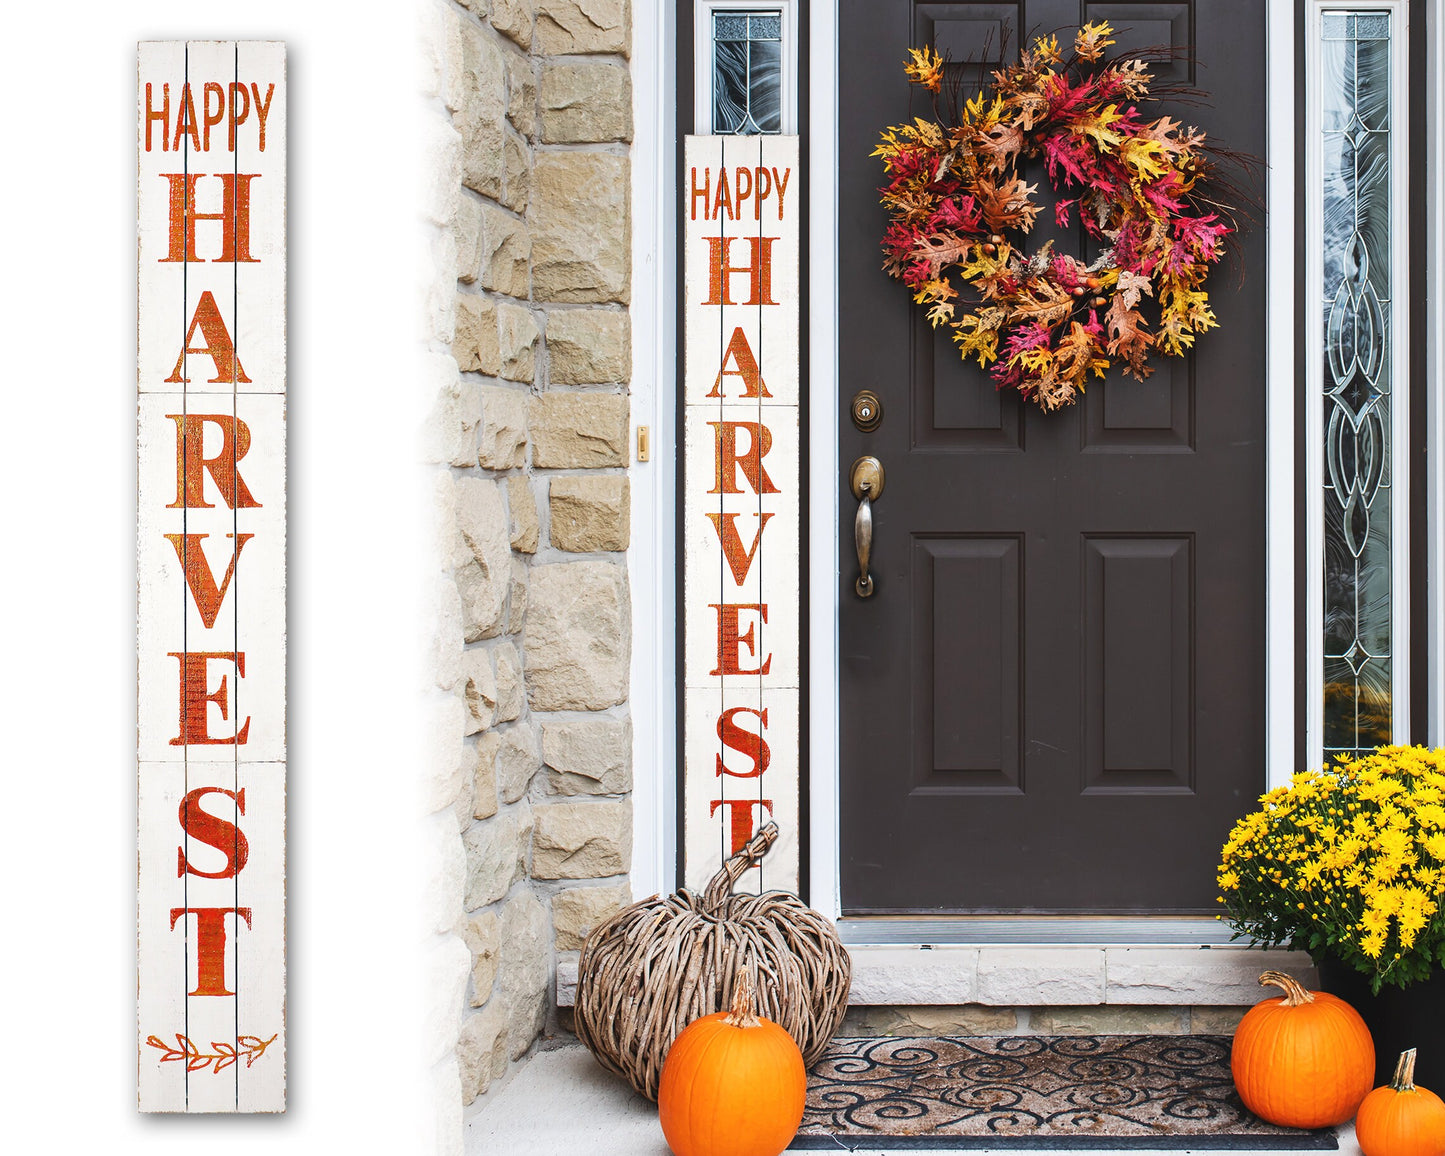 72in Outdoor Happy Harvest Rustic Craft Porch Sign for Front Door, 6ft Vertical Wooden Welcome Sign for Front Porch